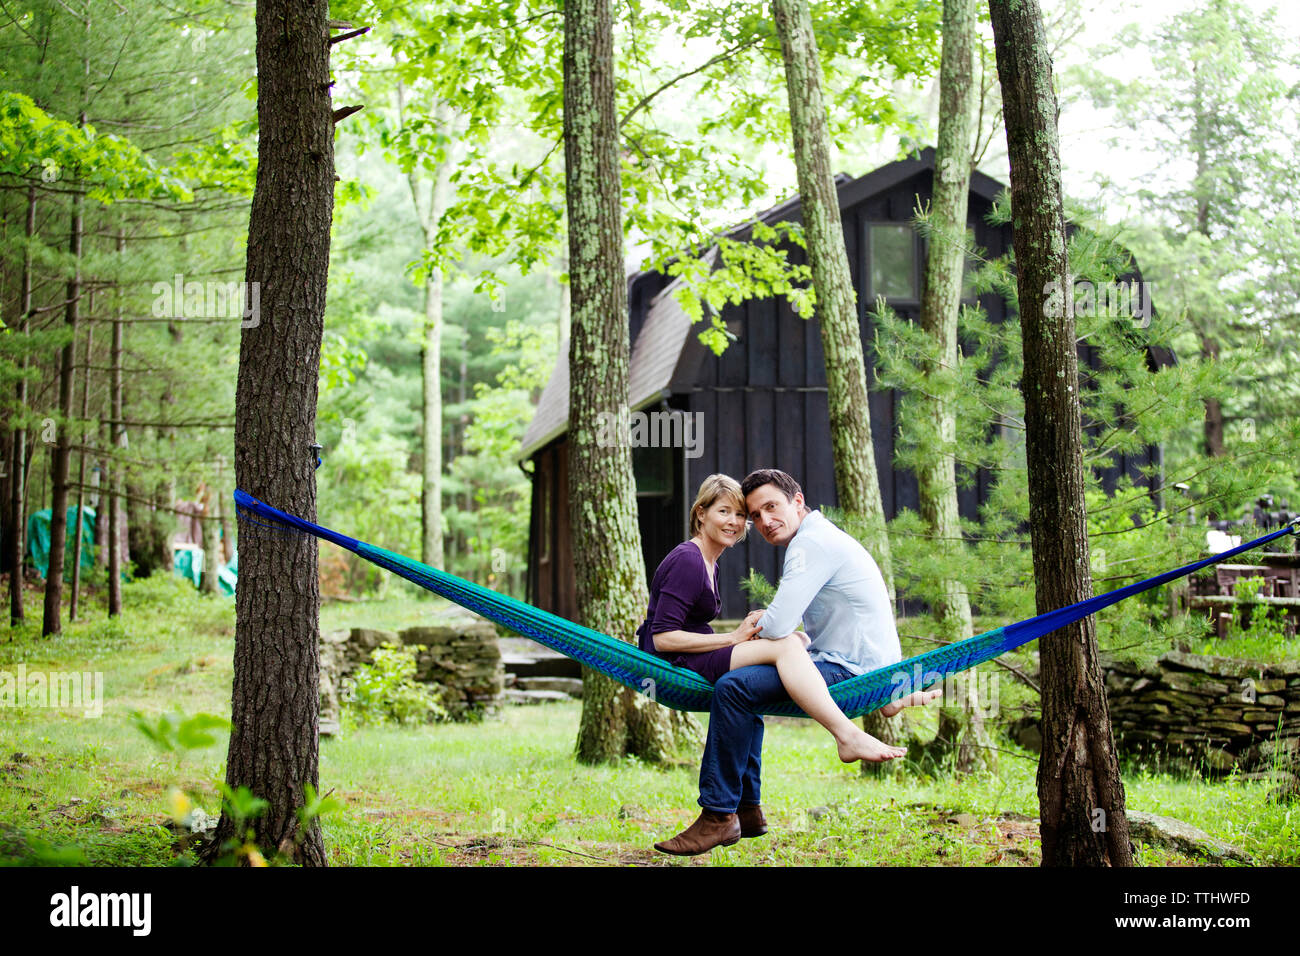 Portrait of couple sitting on hammock Banque D'Images